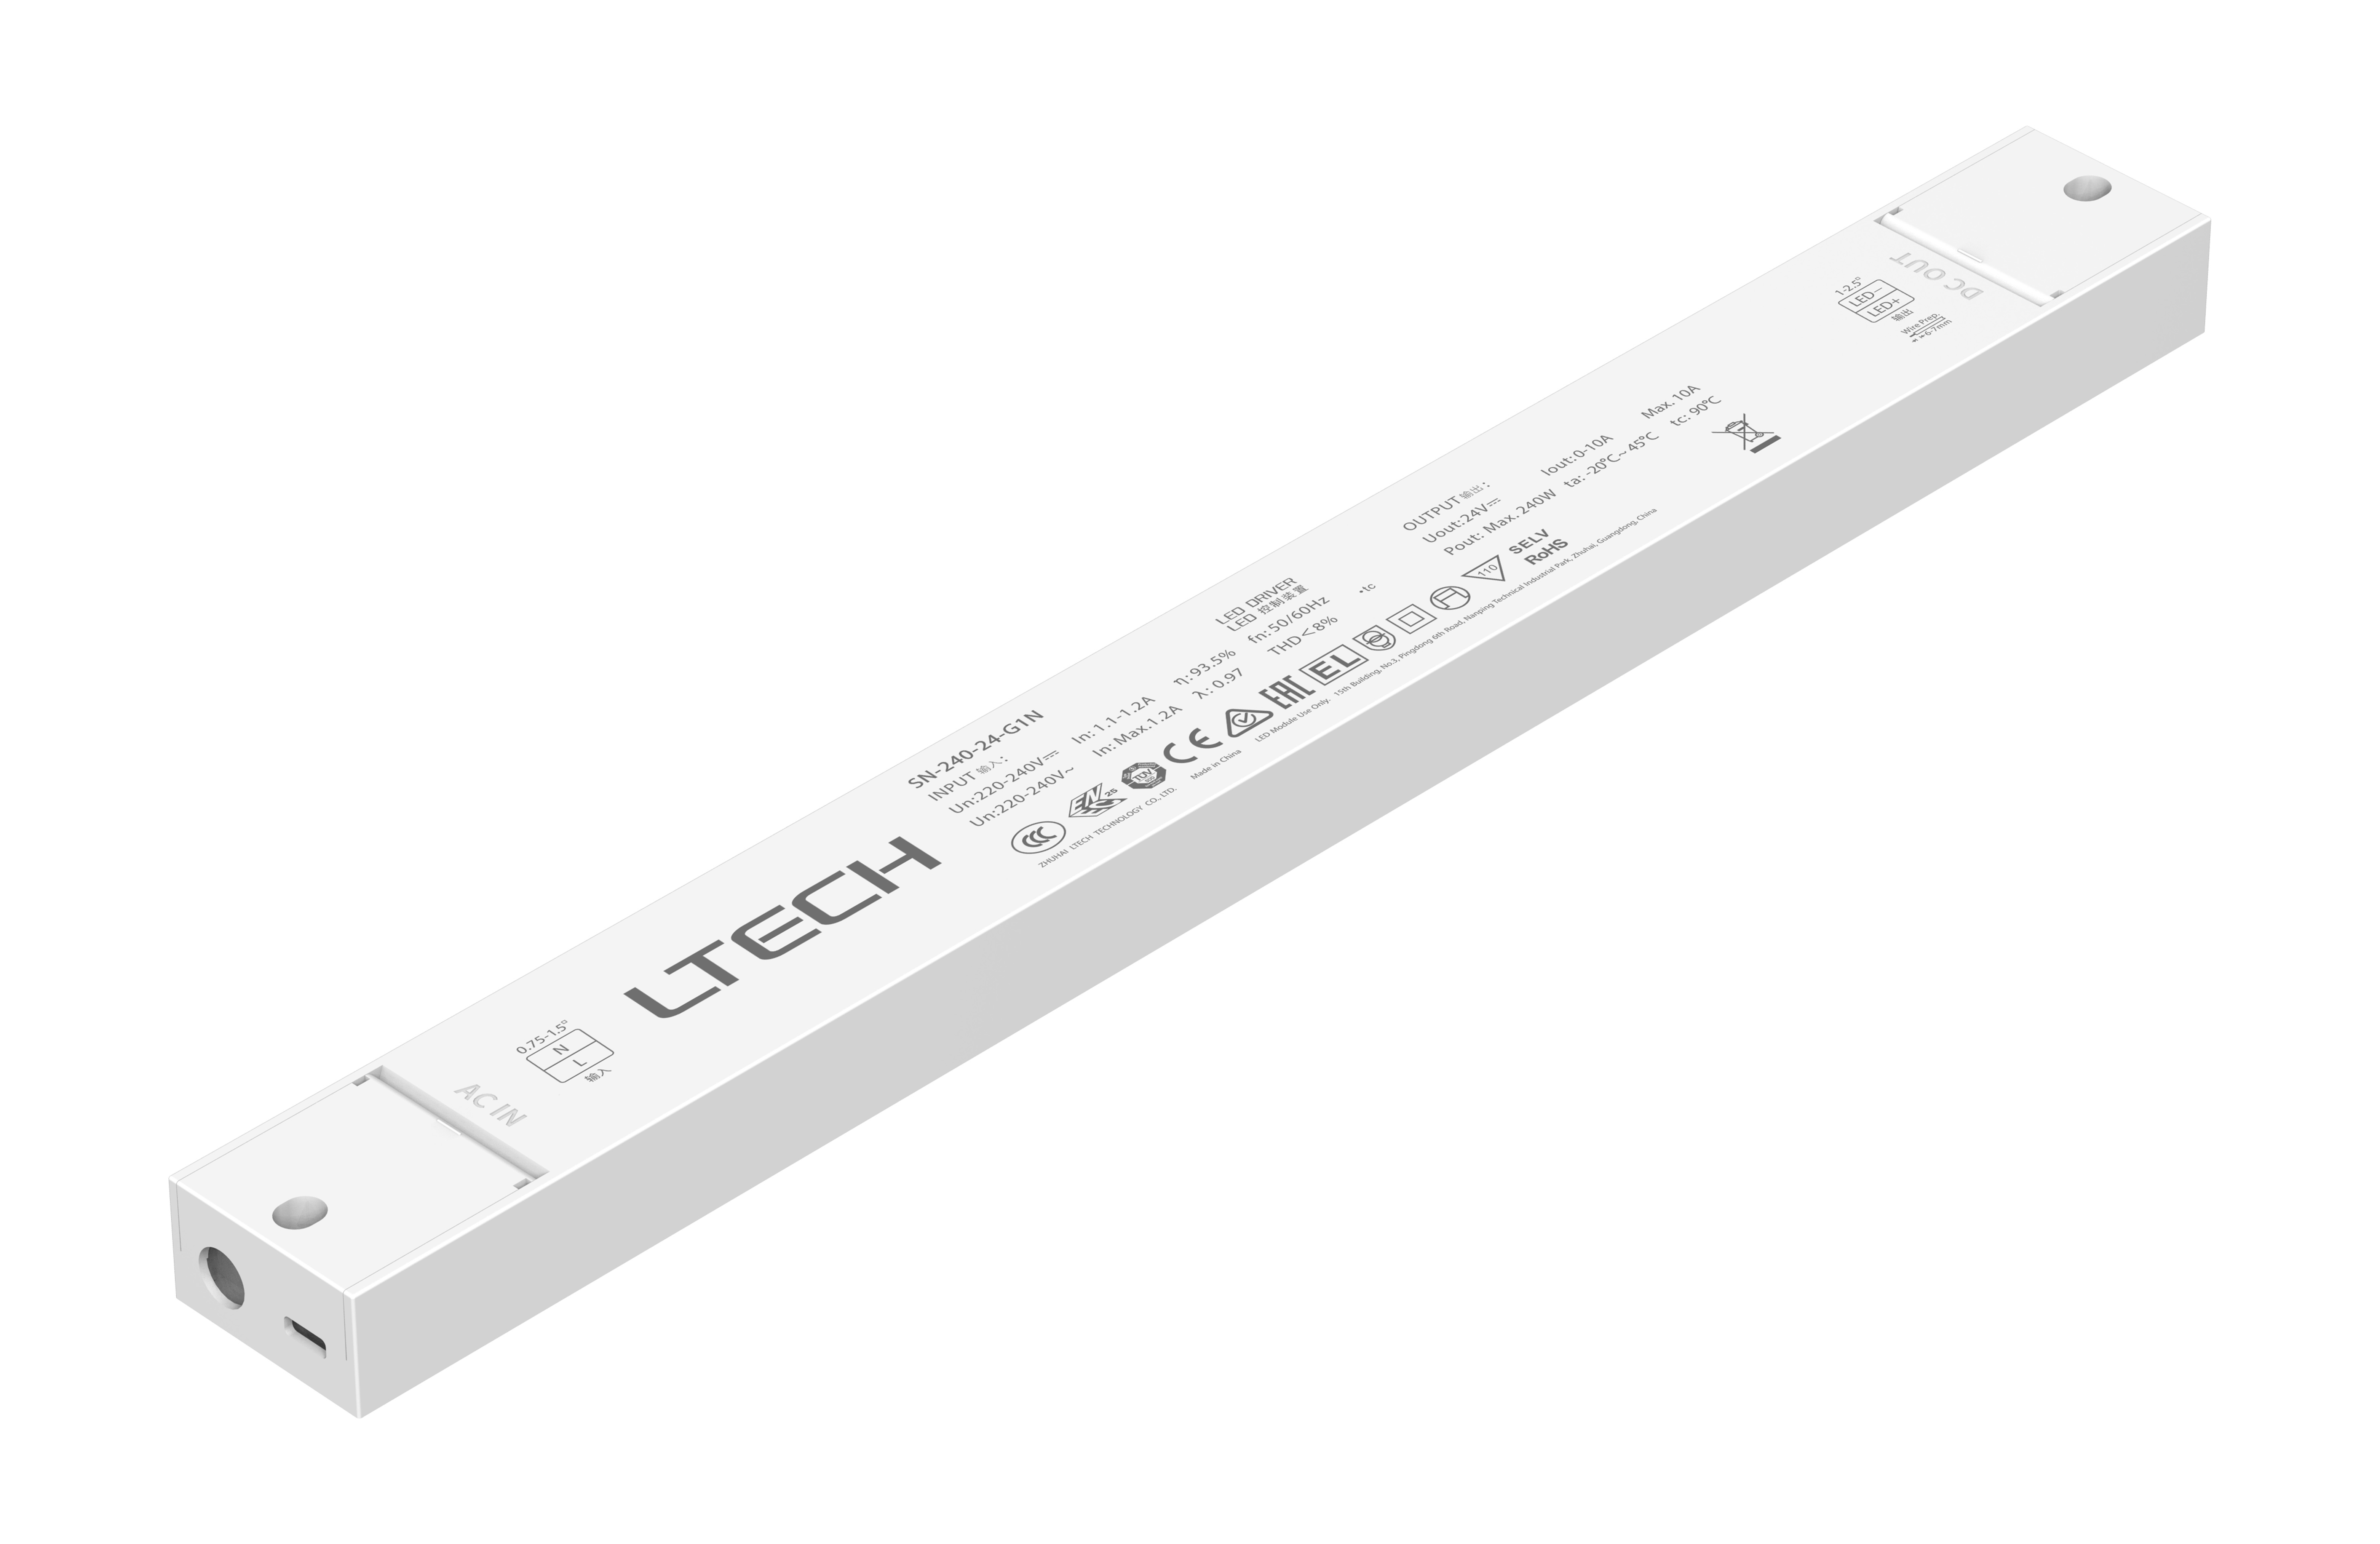 SN-240-24-G1N  Intelligent Constant Voltage  LED Driver; ON/OFF; 240W; 24VDC 10A ; 220-240Vac; IP20; 5yrs Warrenty.